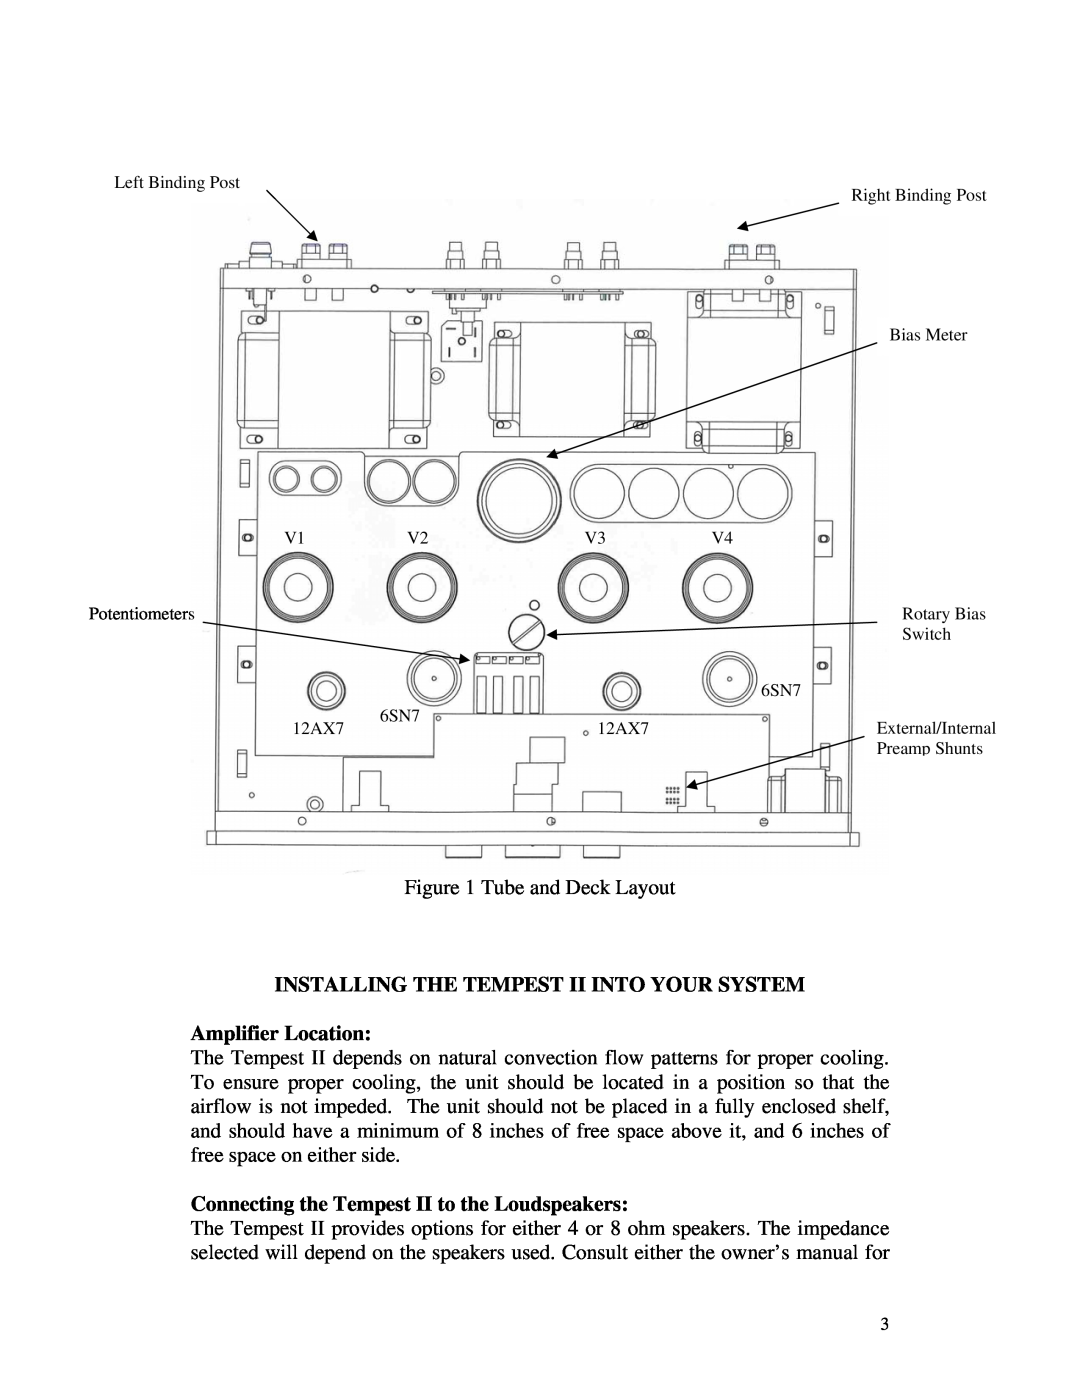 Rogue Audio TEMPEST II owner manual Installing The Tempest Ii Into Your System, Amplifier Location 